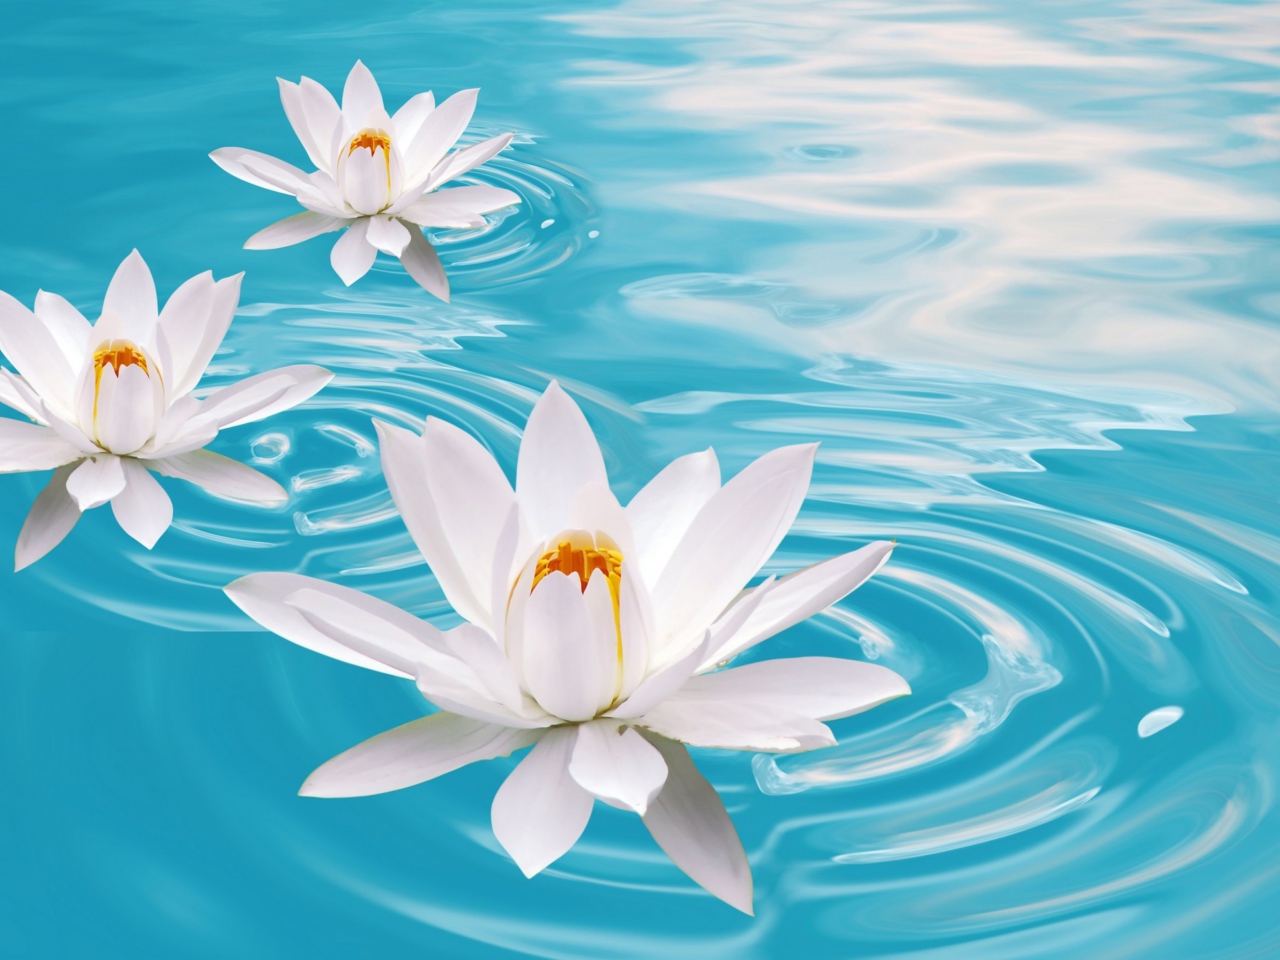 White Lilies And Blue Water wallpaper 1280x960